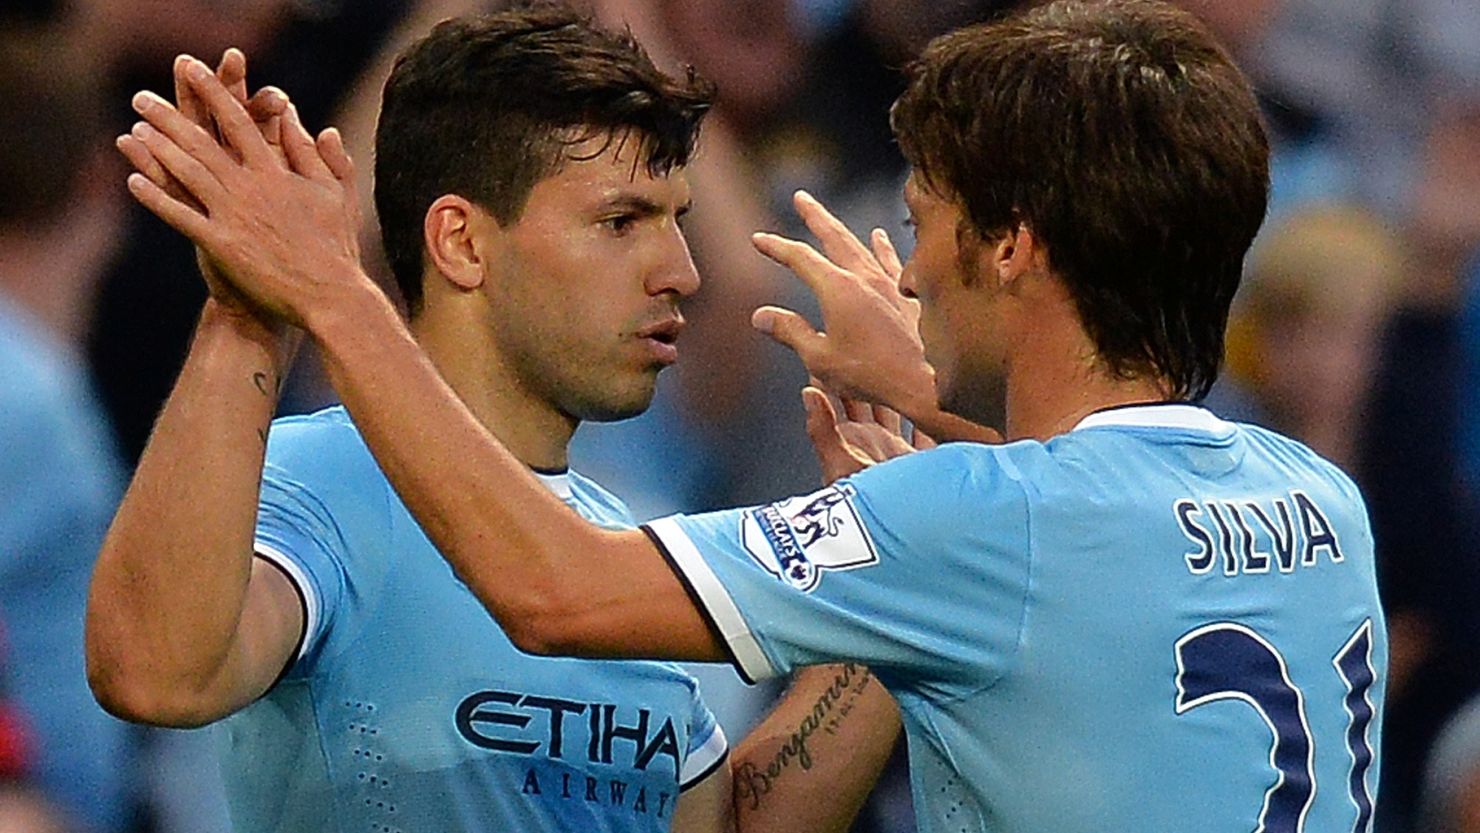 Sergio Aguero and David Silva celebrate scoring for Manchester City to help set up victory against Newcastle.